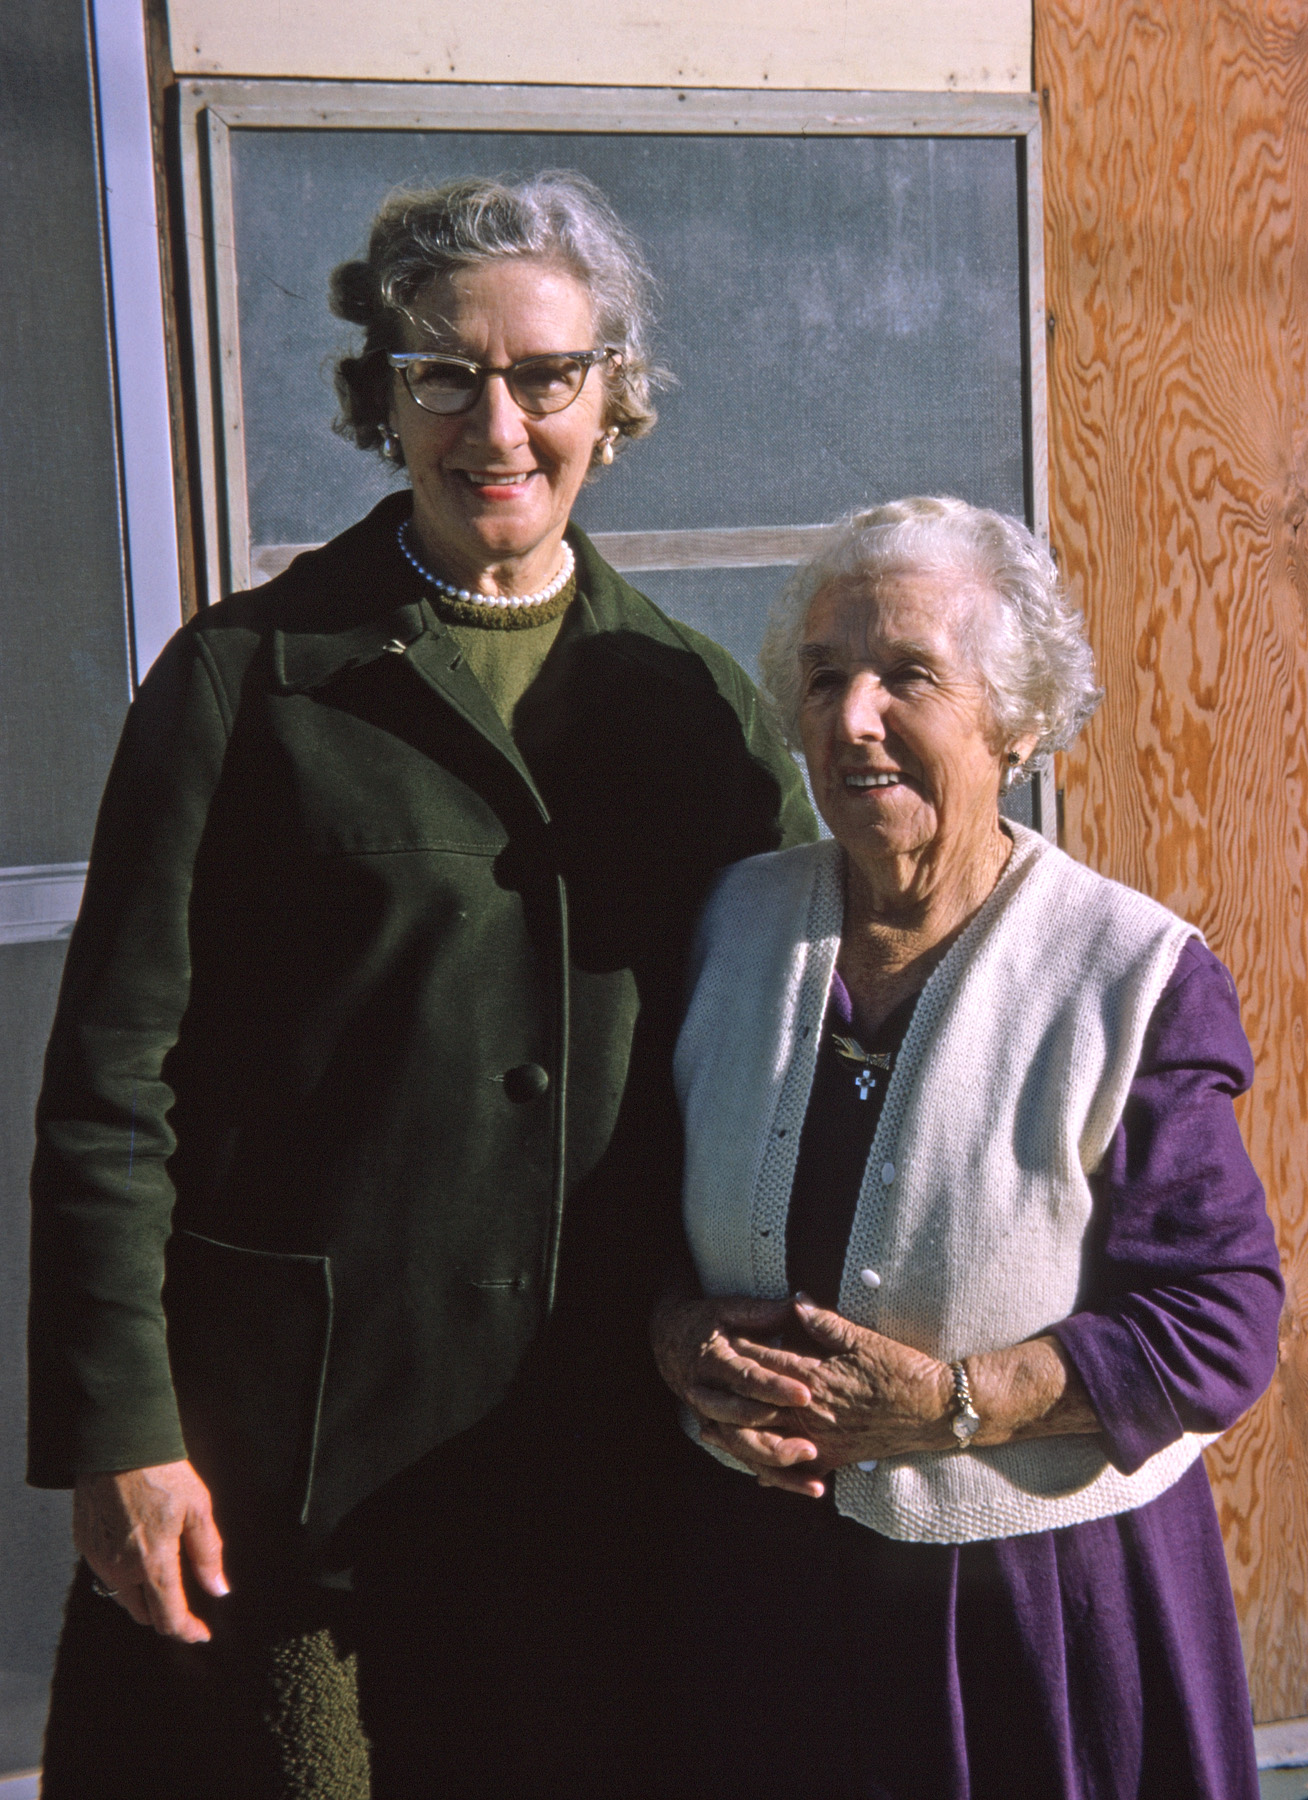 My mother and my father's mother on a chilly January day in 1966. Kodachrome slide I took in Calpella, California, where my grandfather raised grapes from 1915 to 1953. View full size.